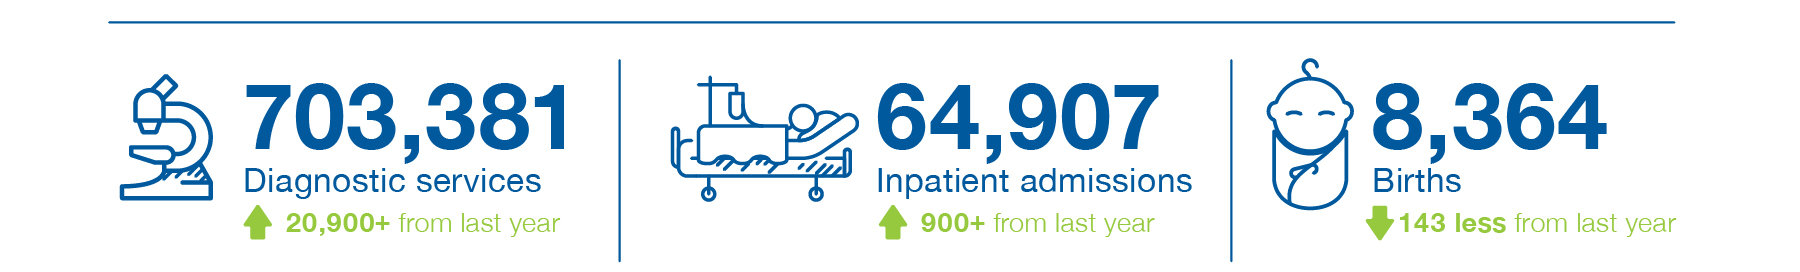 703,381 diagnostic services (over 20,900 more than last year). 64,907 inpatient admissions (over 900 more than last year). 8,364 births (143 less than previous year).